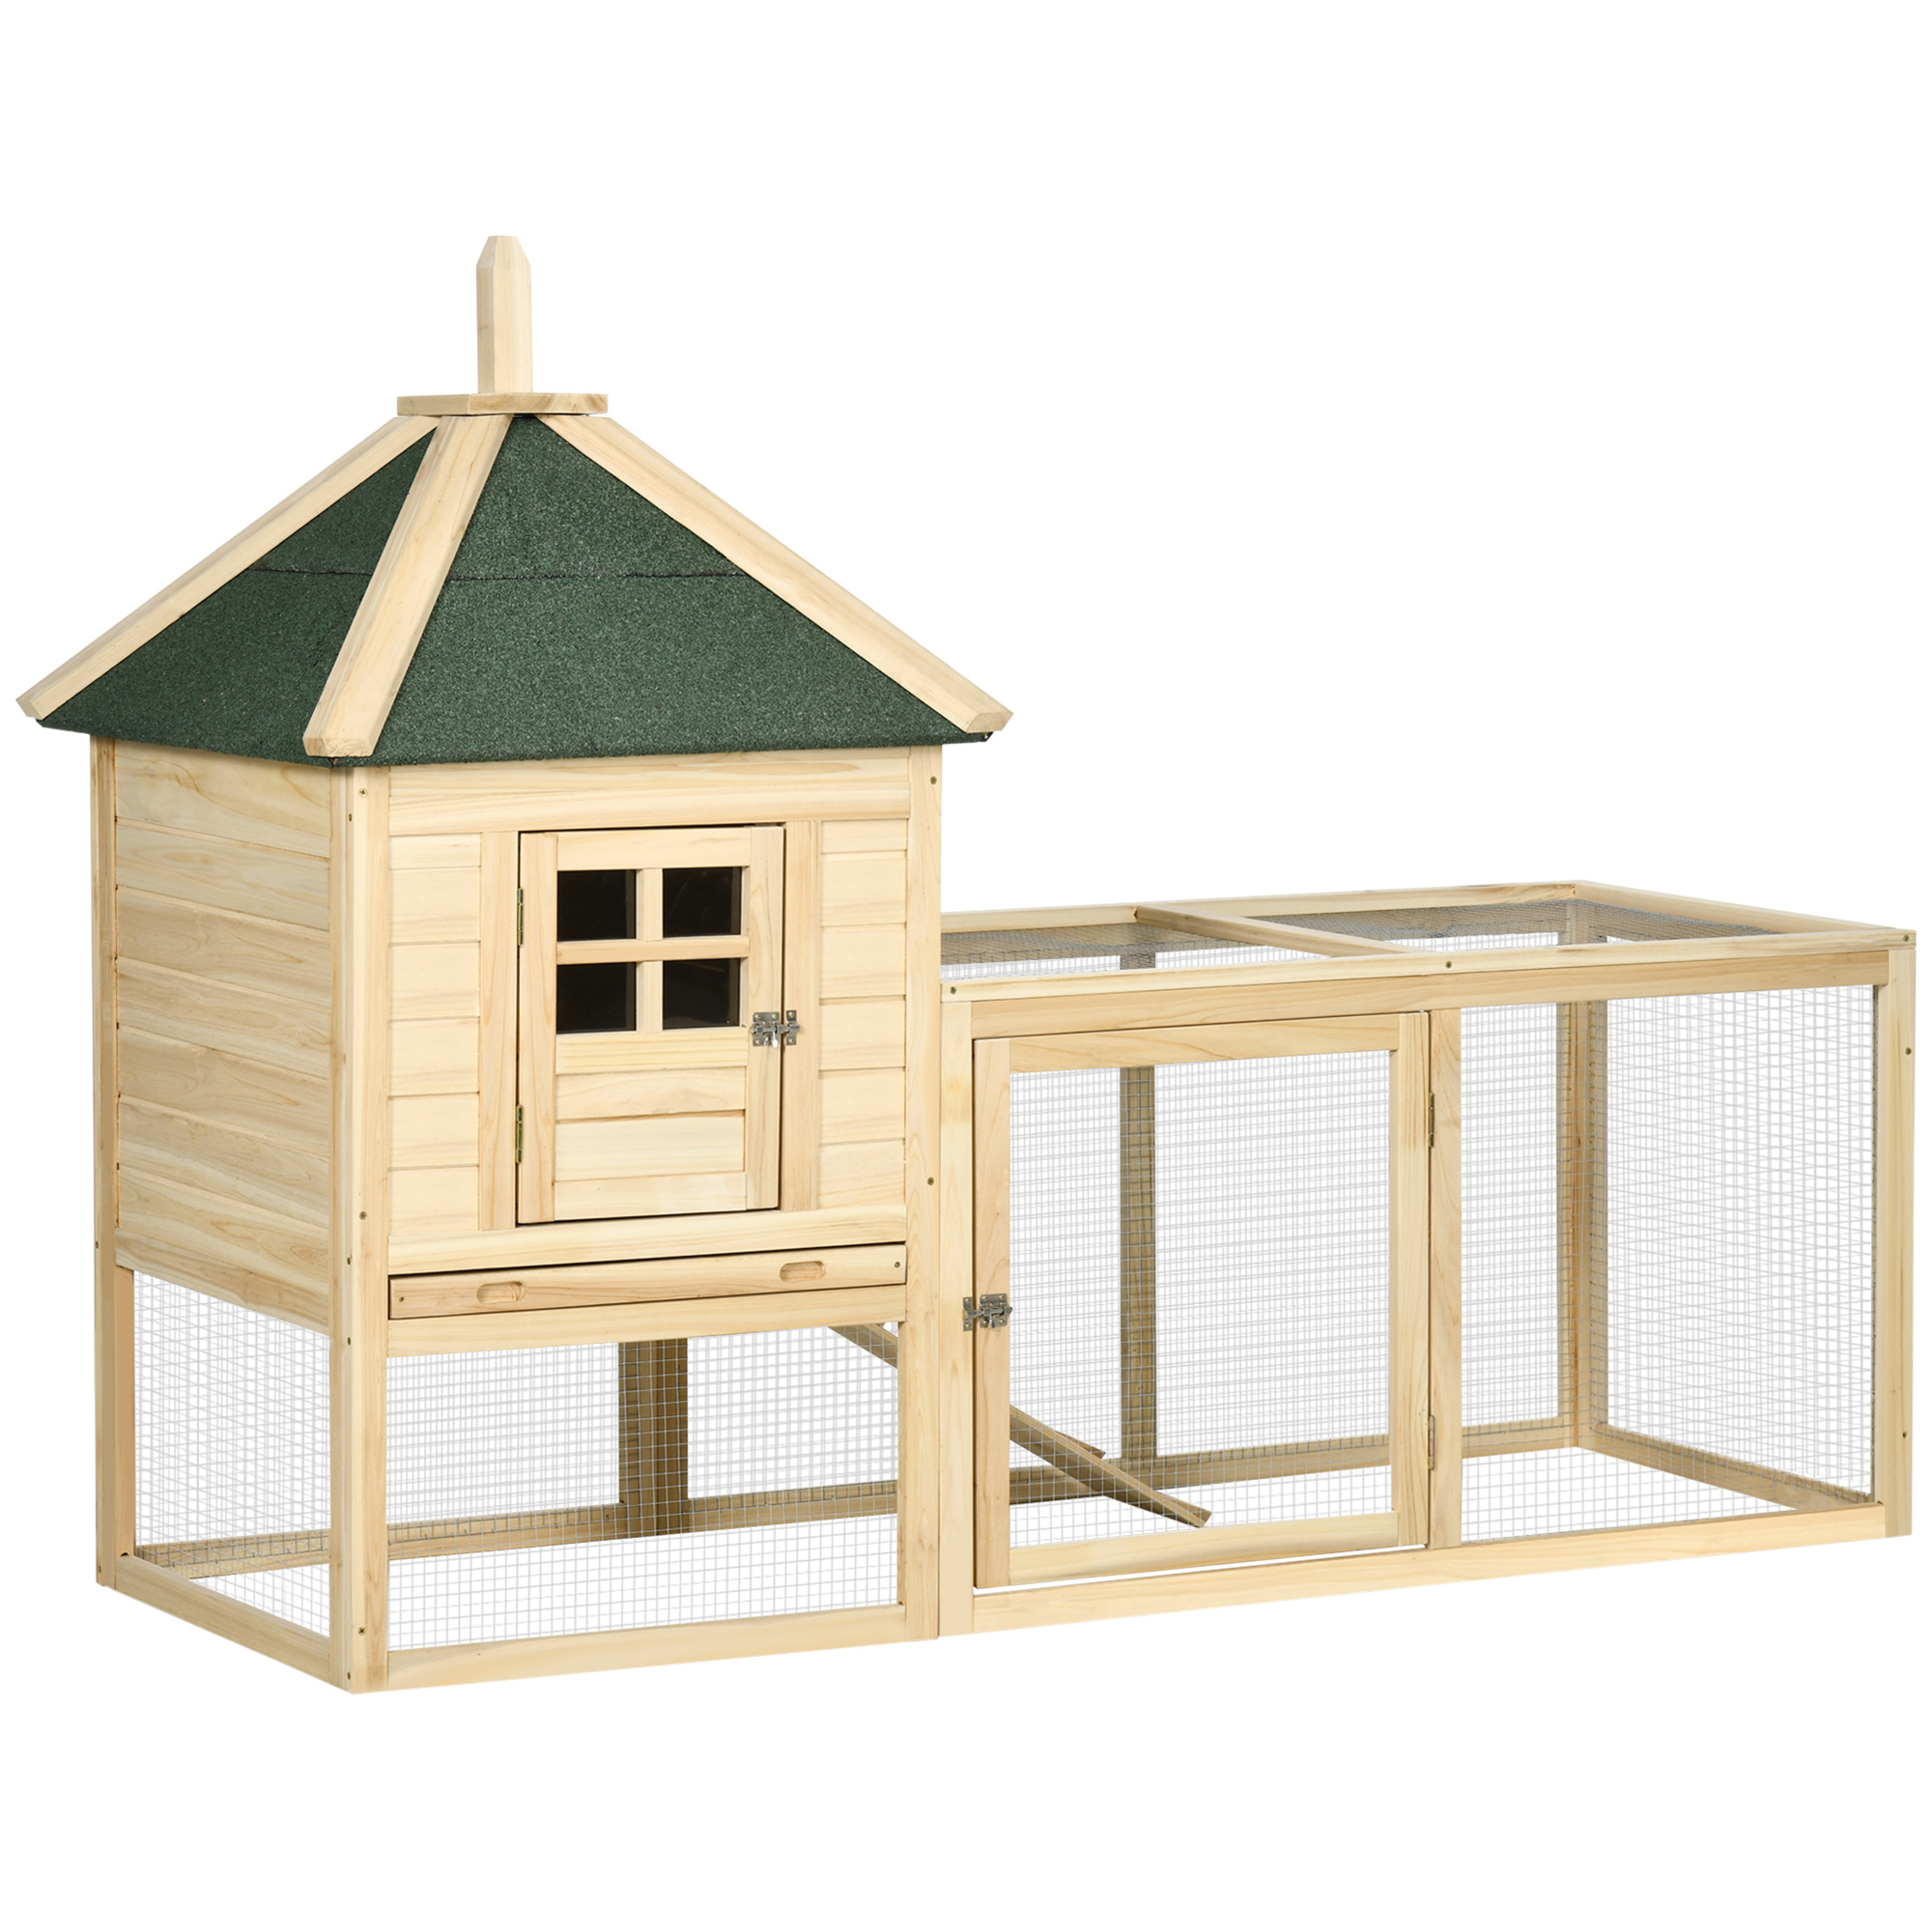 Wooden Rabbit Hutch with 3 Doors, Ramp, Slide-out Tray